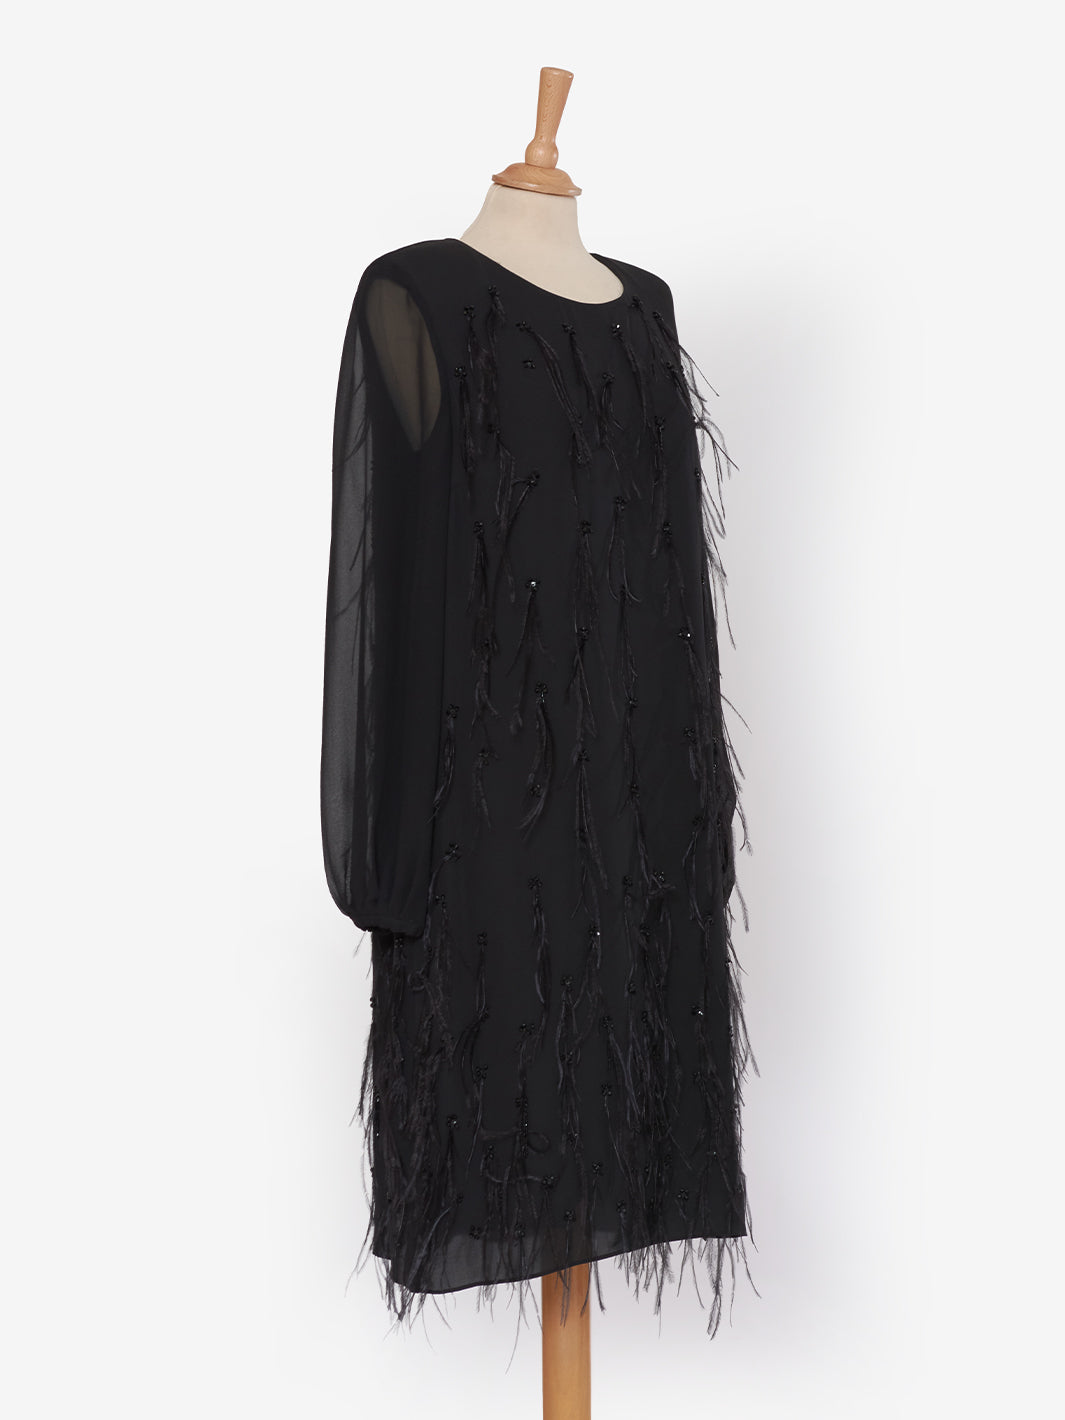 Max Mara black dress with feathers